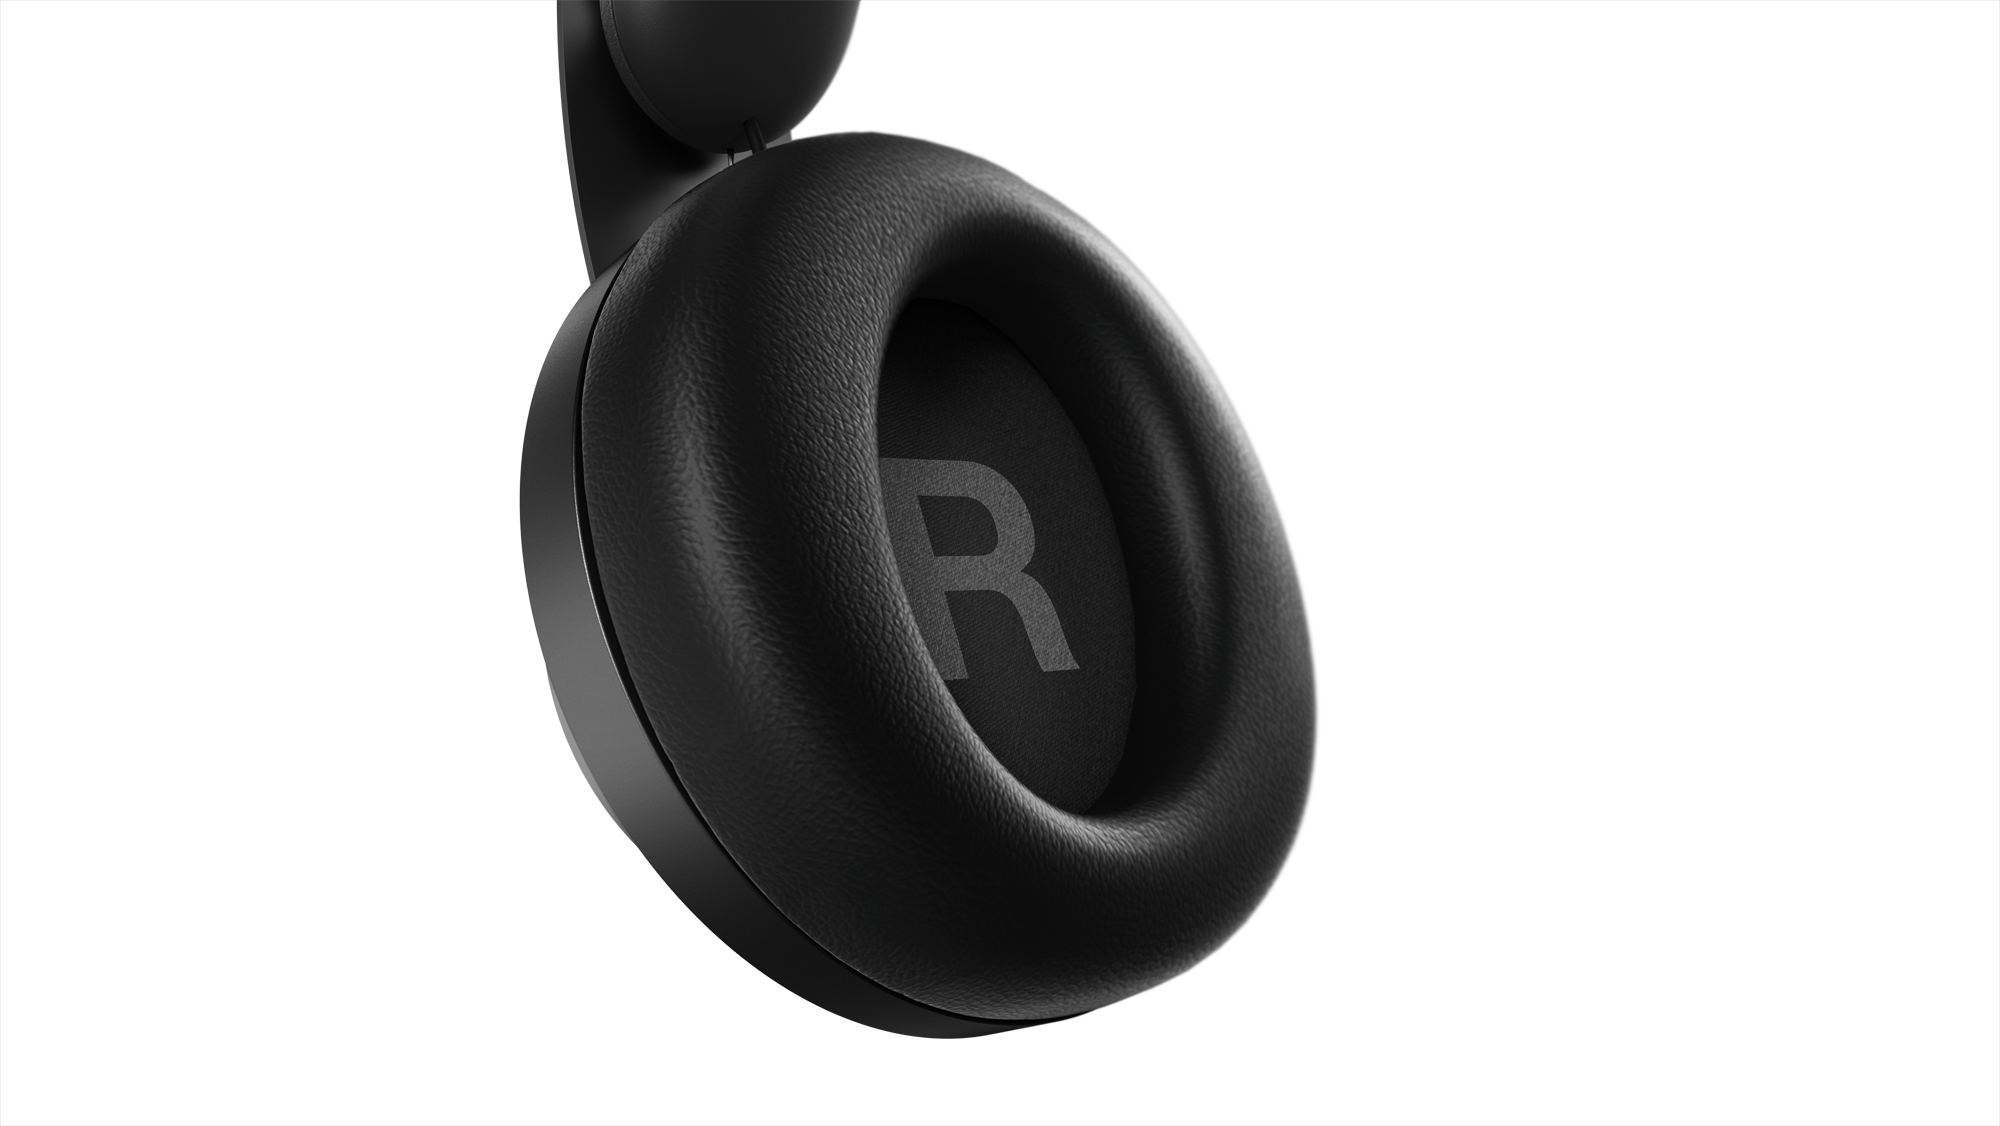 lenovo announce new legion gaming peripherals ces 2019 05 h500 hero rotatable earcups